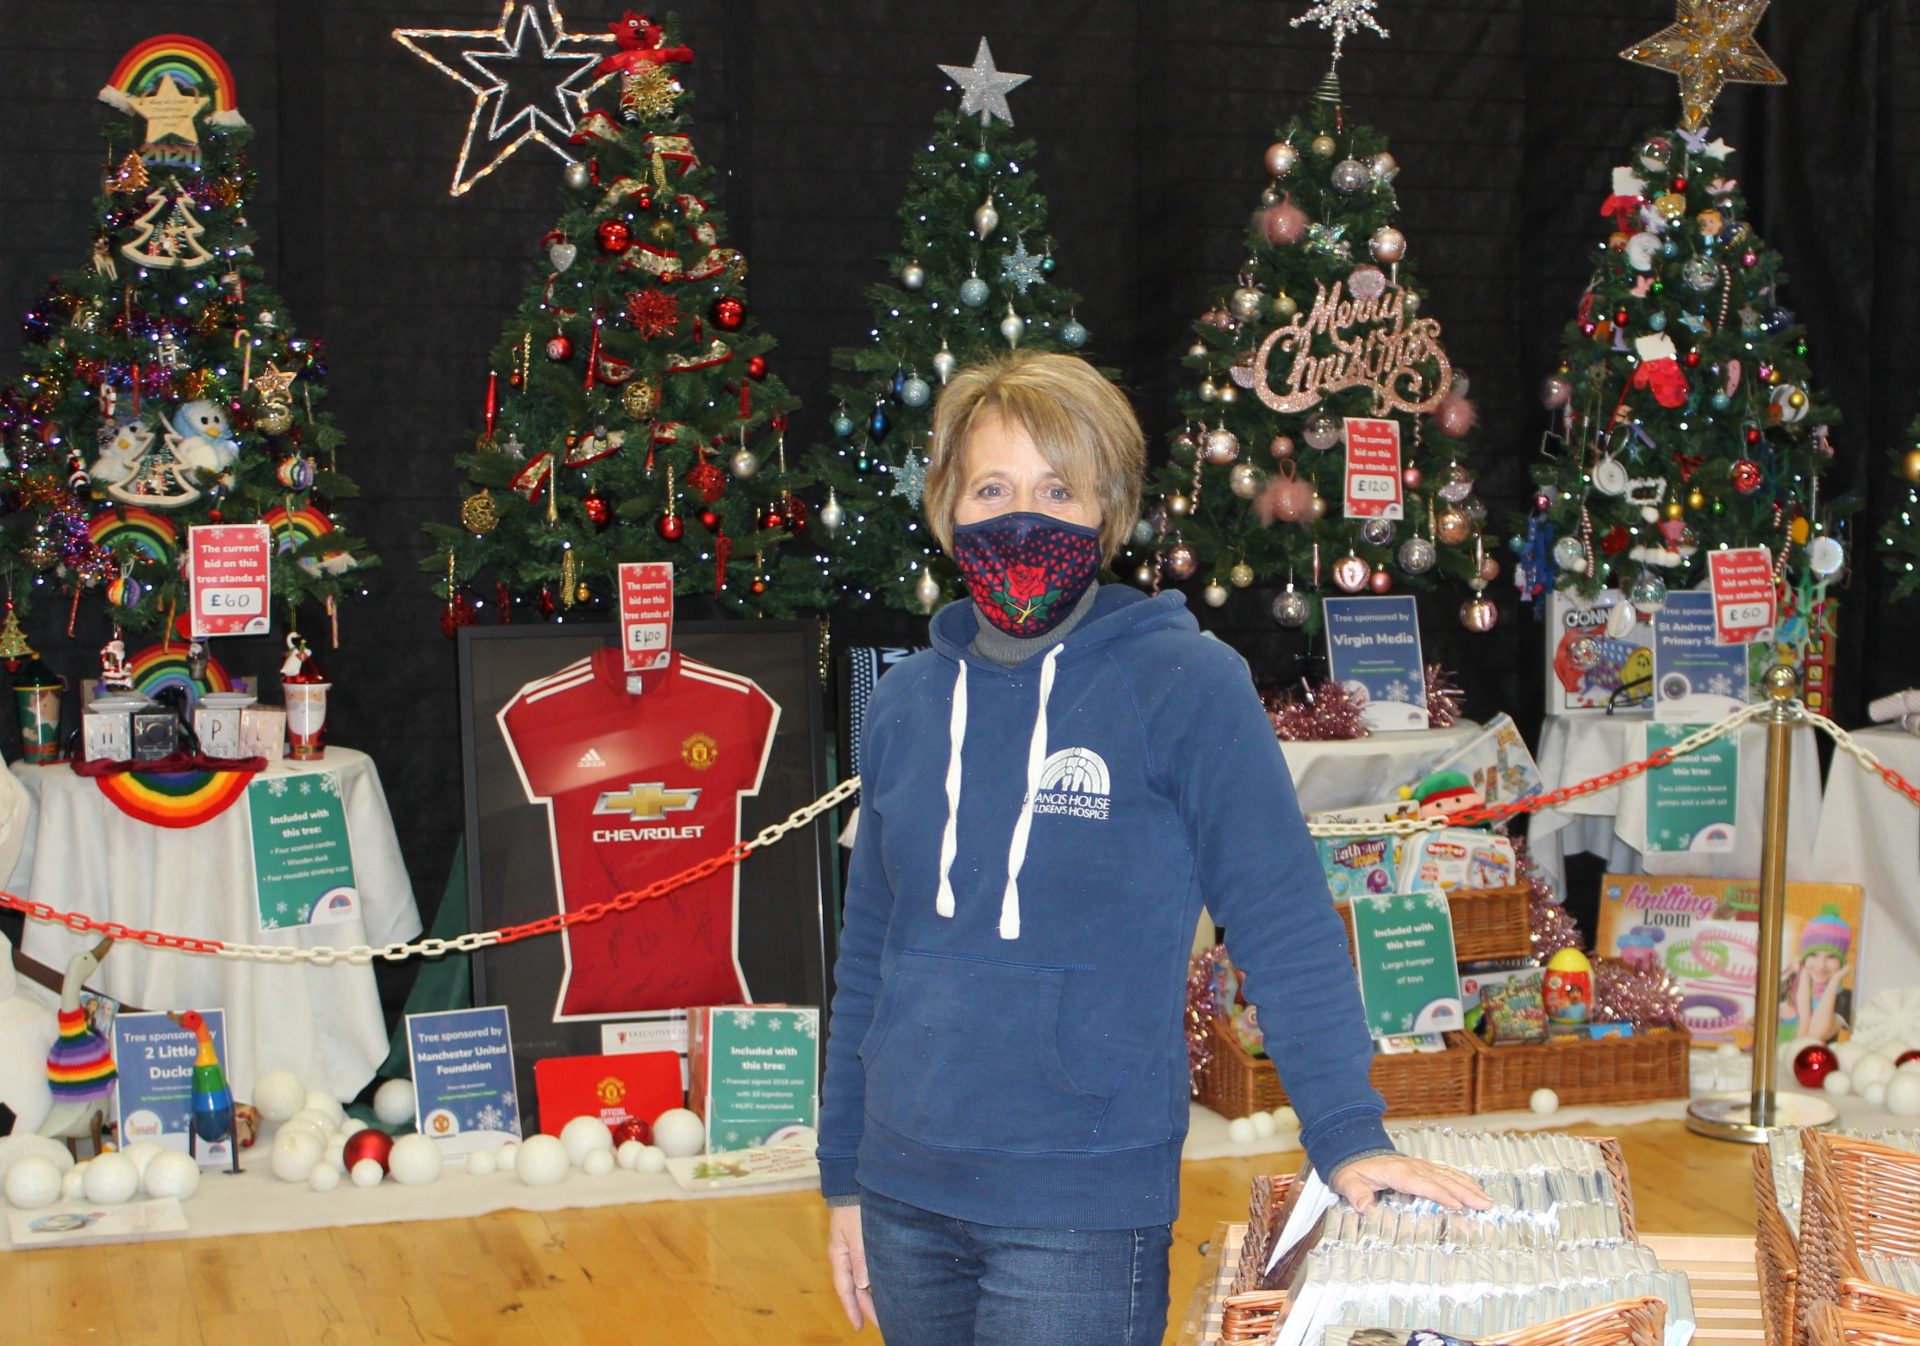 Julie Williams stood infront of Christmas trees